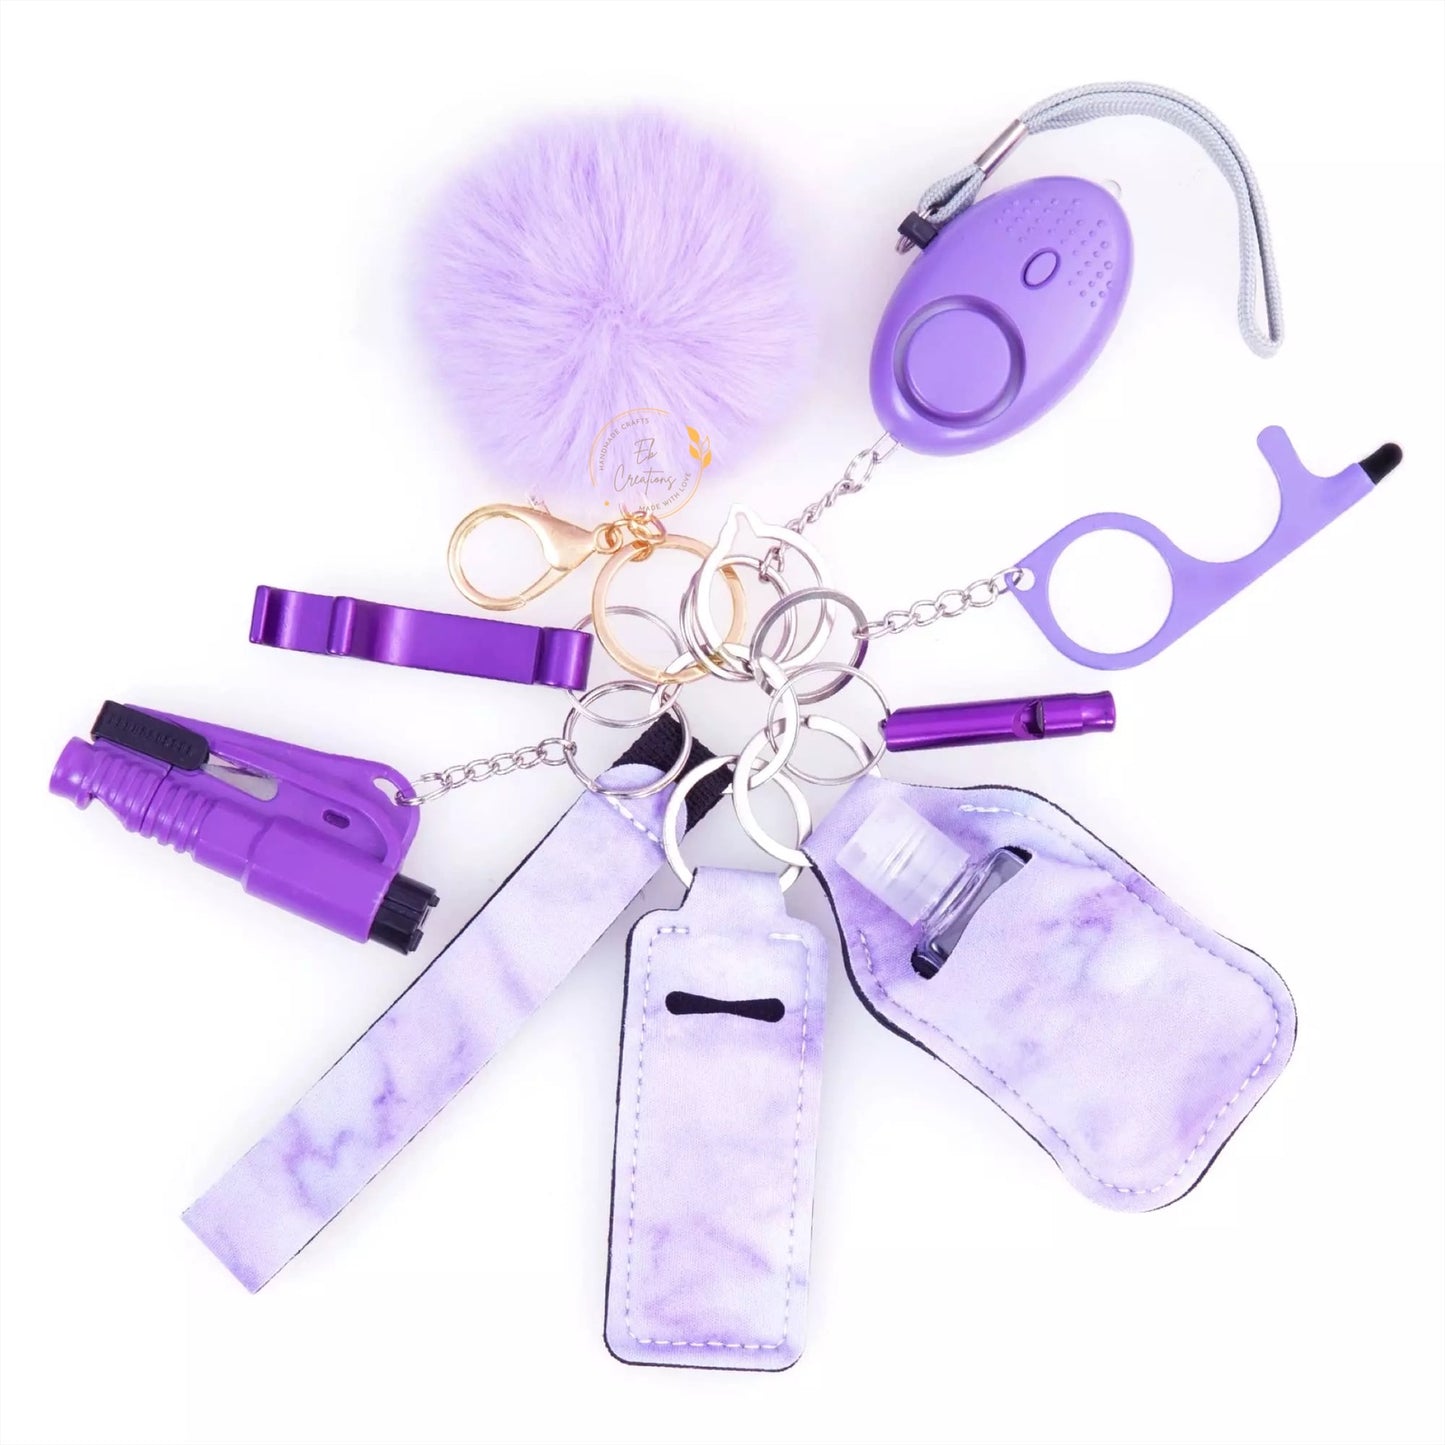 Ladies self defense keychain set | College Students | Safety | Protection - Eb Creations Ladies self defense keychain set | College Students | Safety | Protection